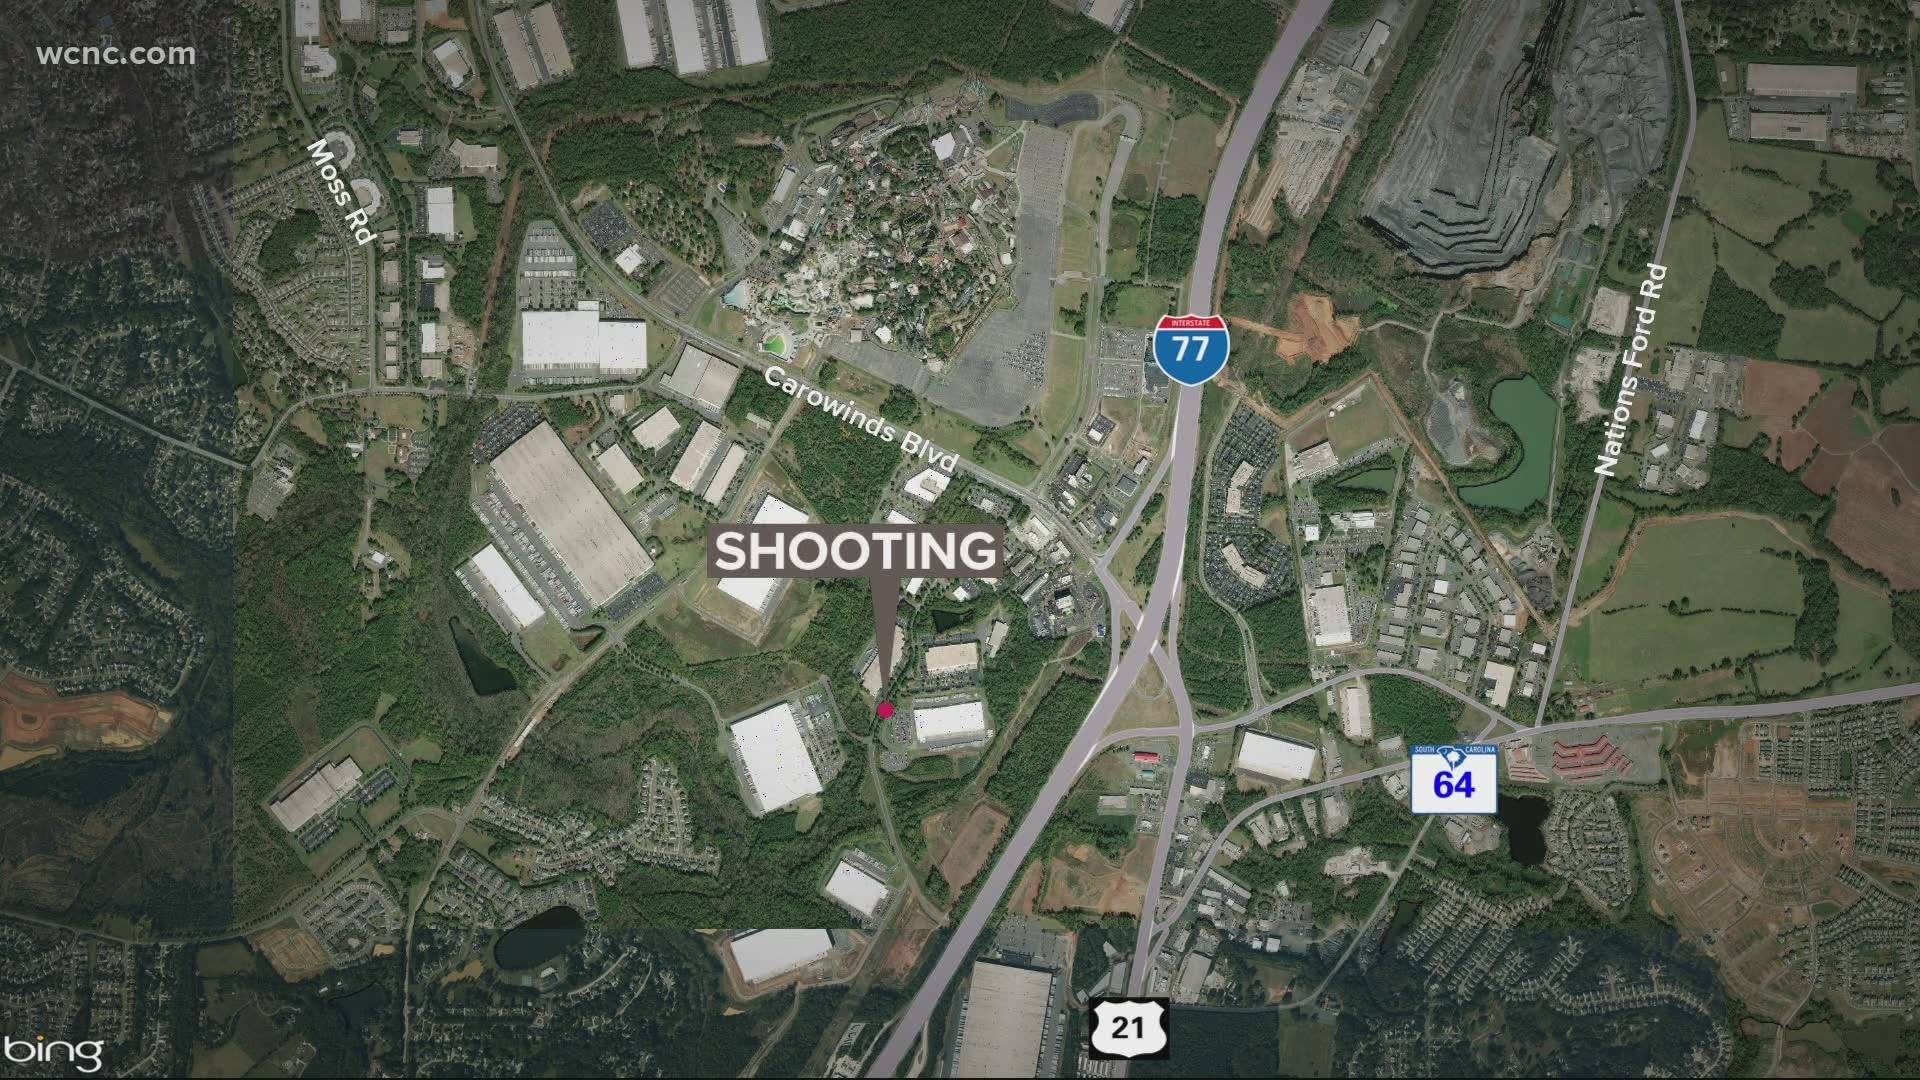 The search for a gunman continues after a deadly shooting at Sleep Inn Hotel near Carowinds Blvd.